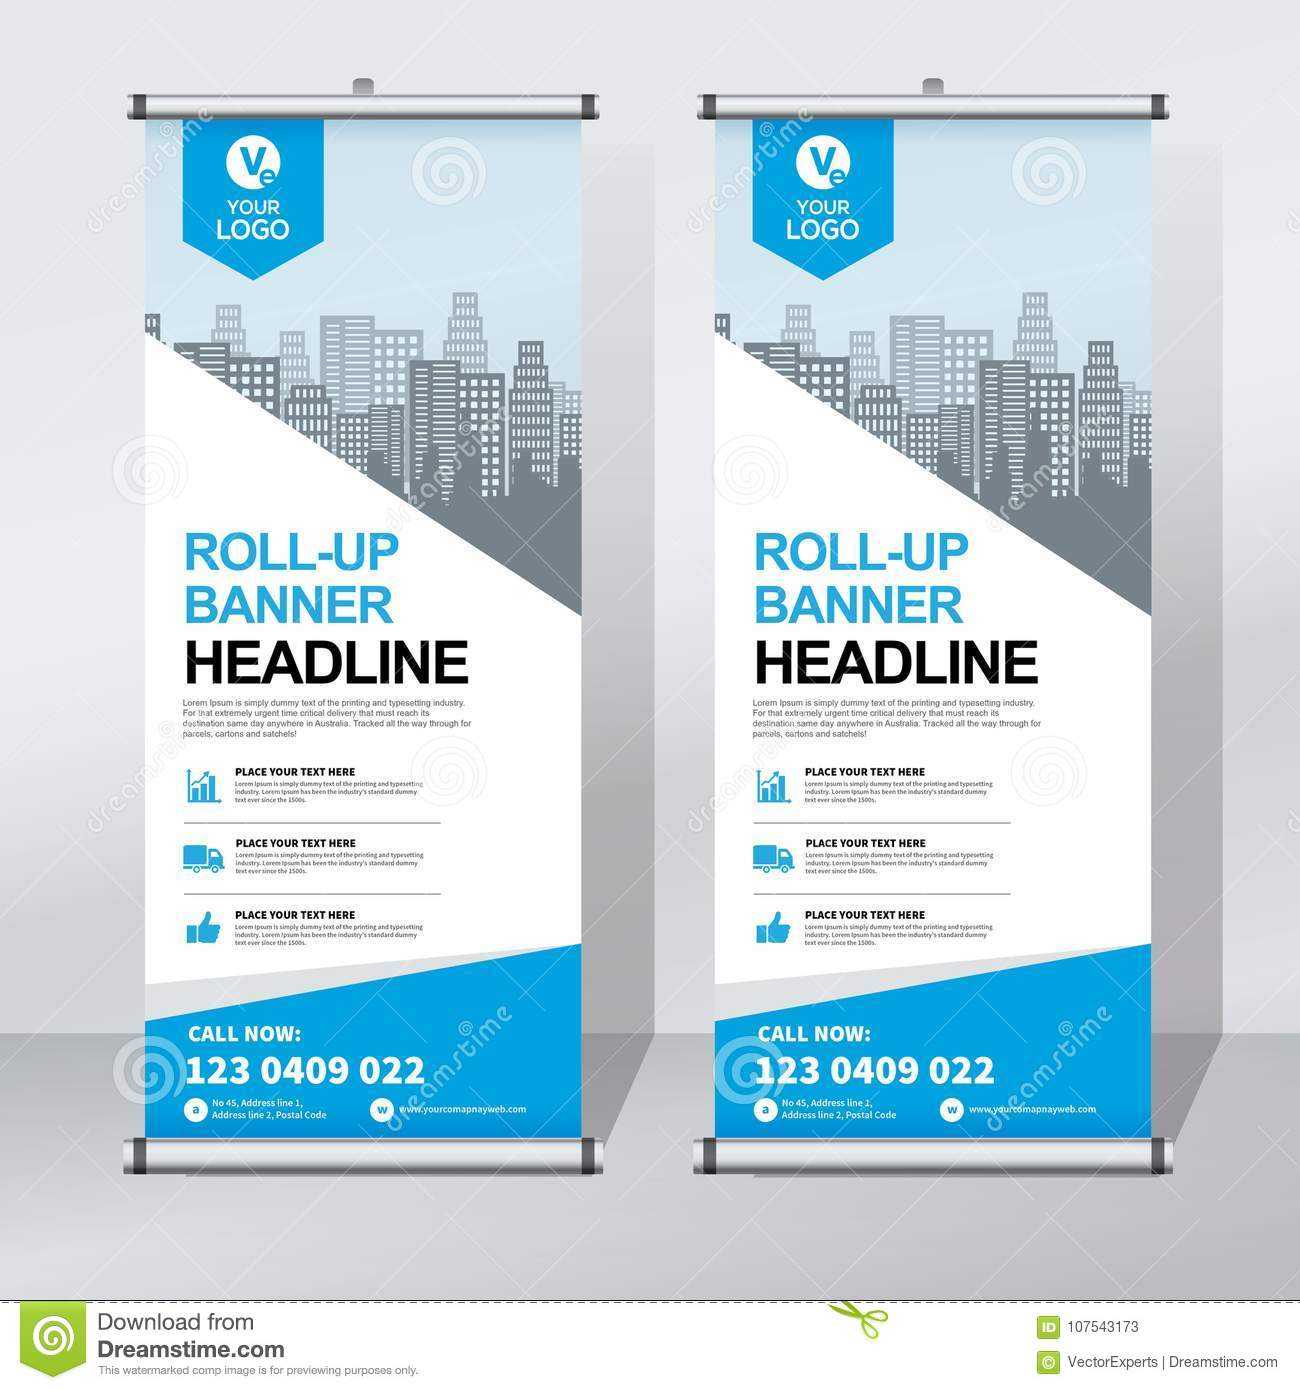 Retractable Banner Design Templates - Yeppe With Regard To Retractable Banner Design Templates